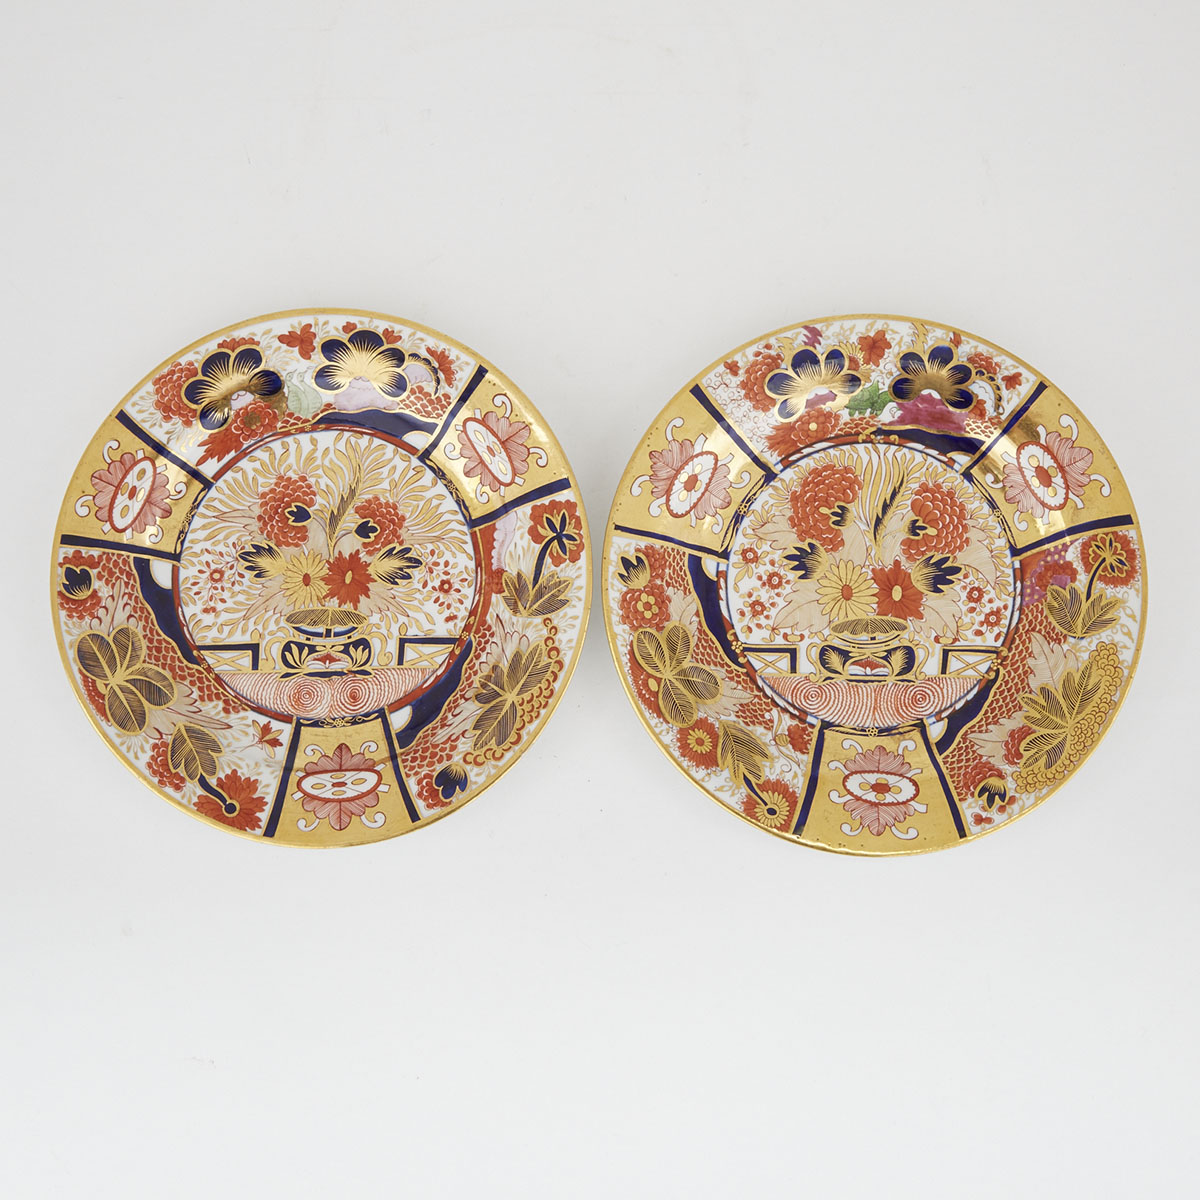 Pair of Chamberlains Worcester Japan Pattern Plates, c.1810